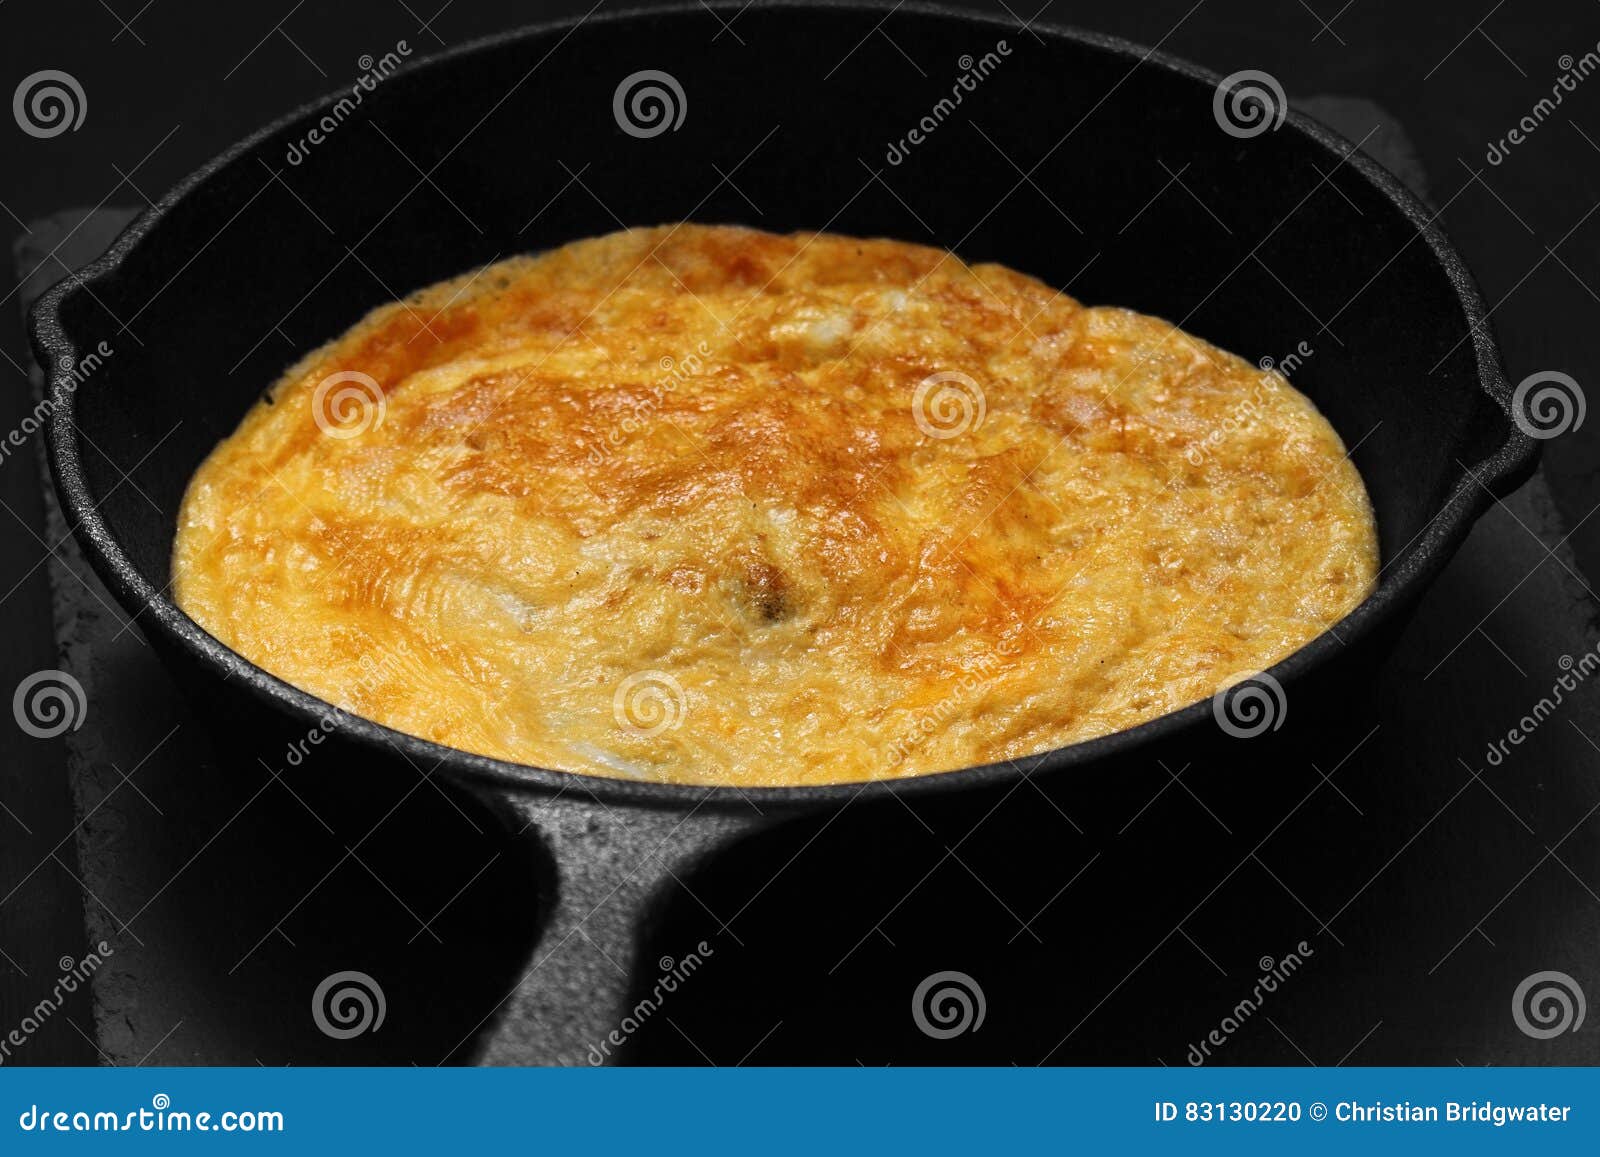 omelette in a cast iron frying pan